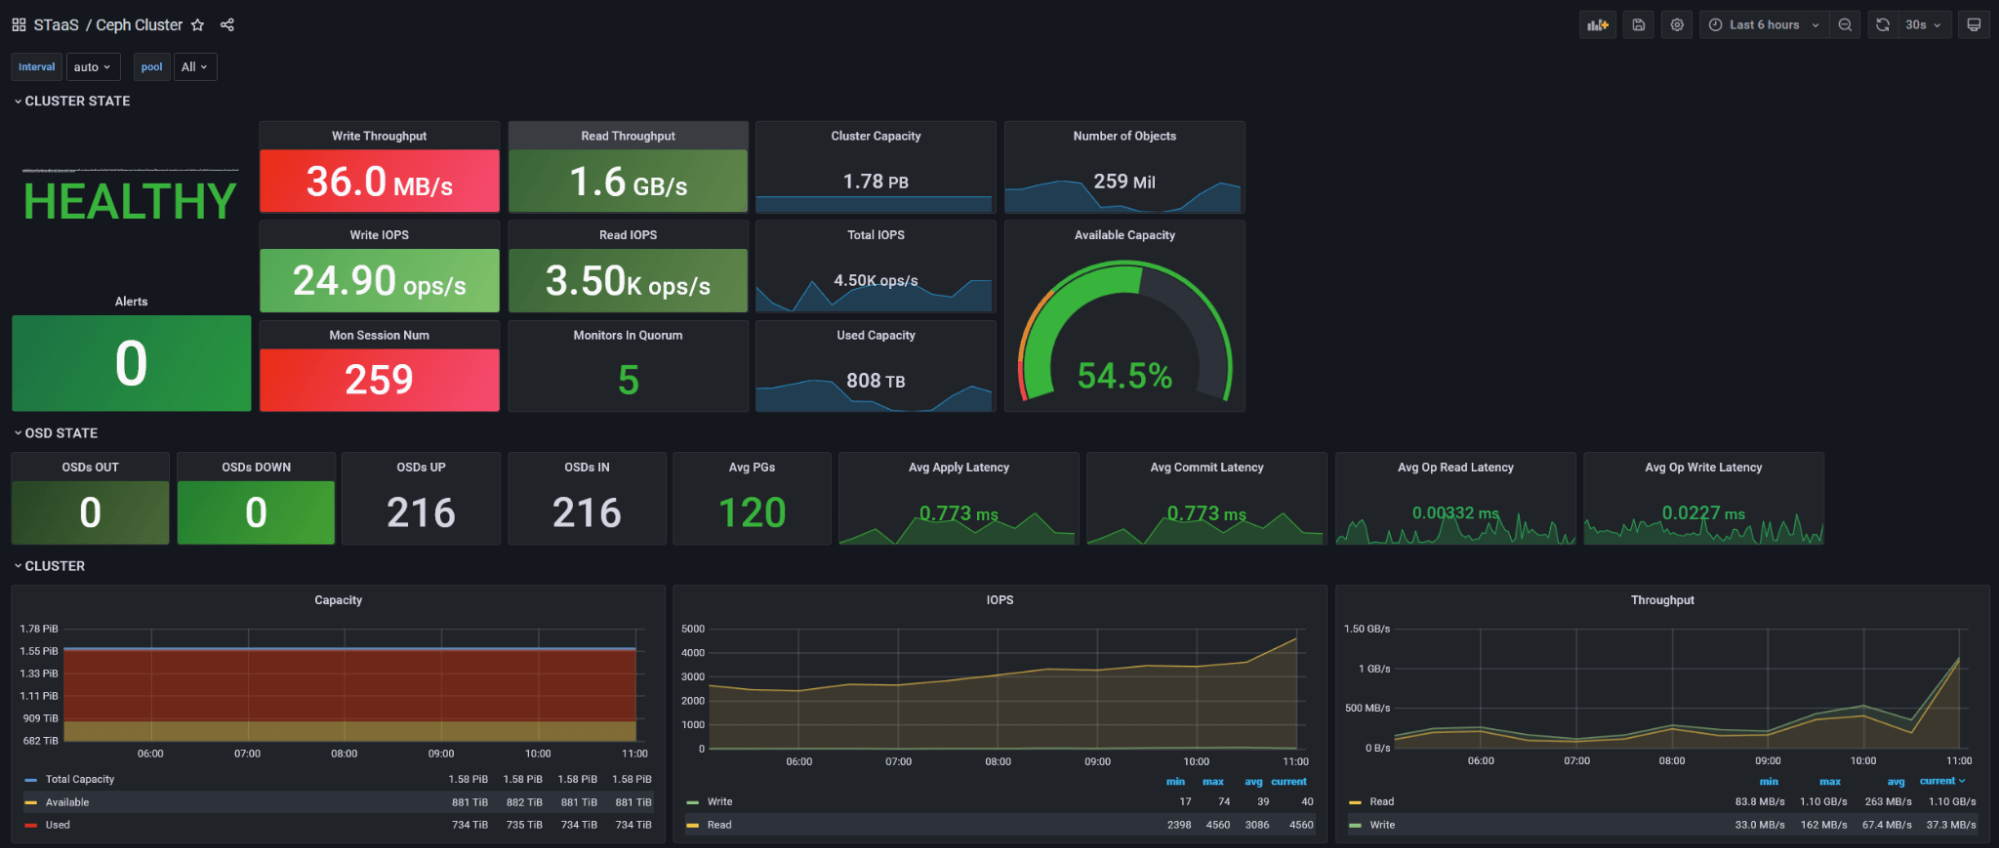 A Grafana dashboard displaying data about a Ceph cluster state.